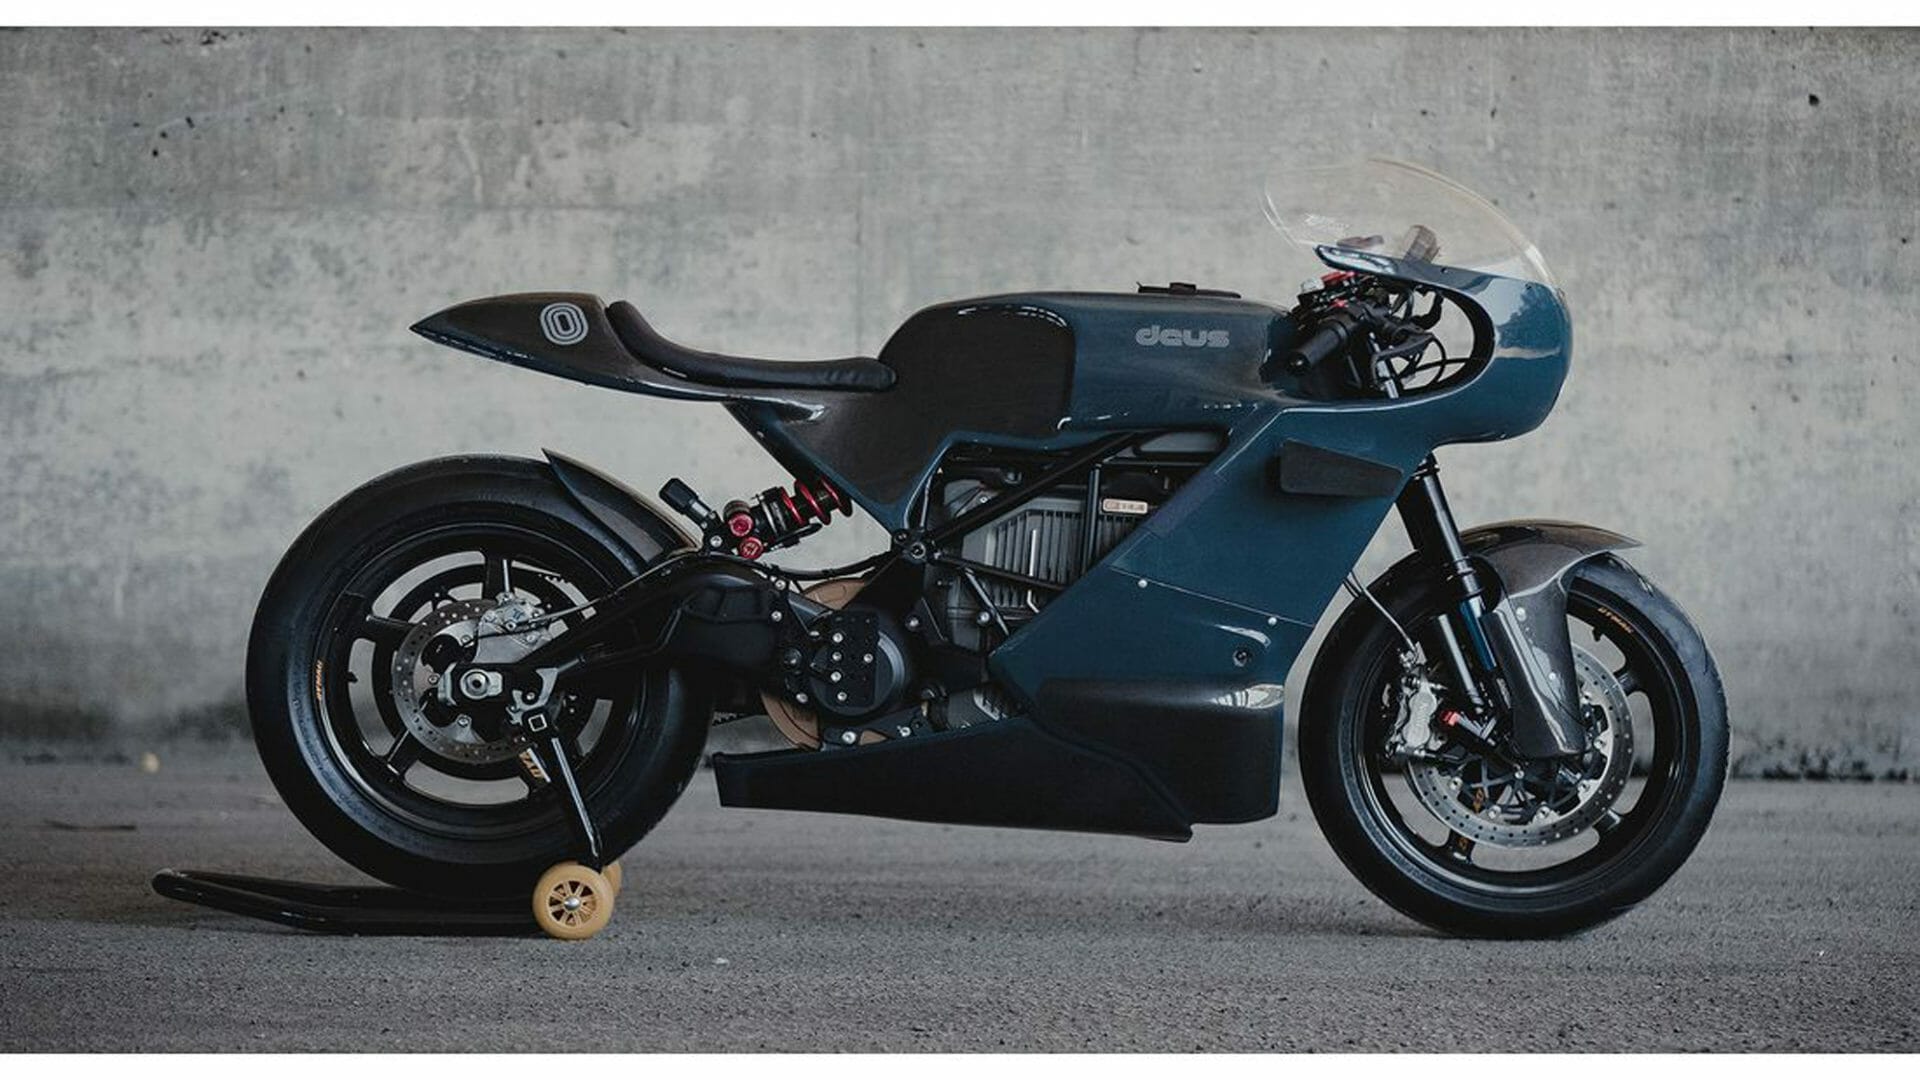 Deus Ex Machina converts electric motorcycle to Cafe Racer
- also in the App MOTORCYCLE NEWS